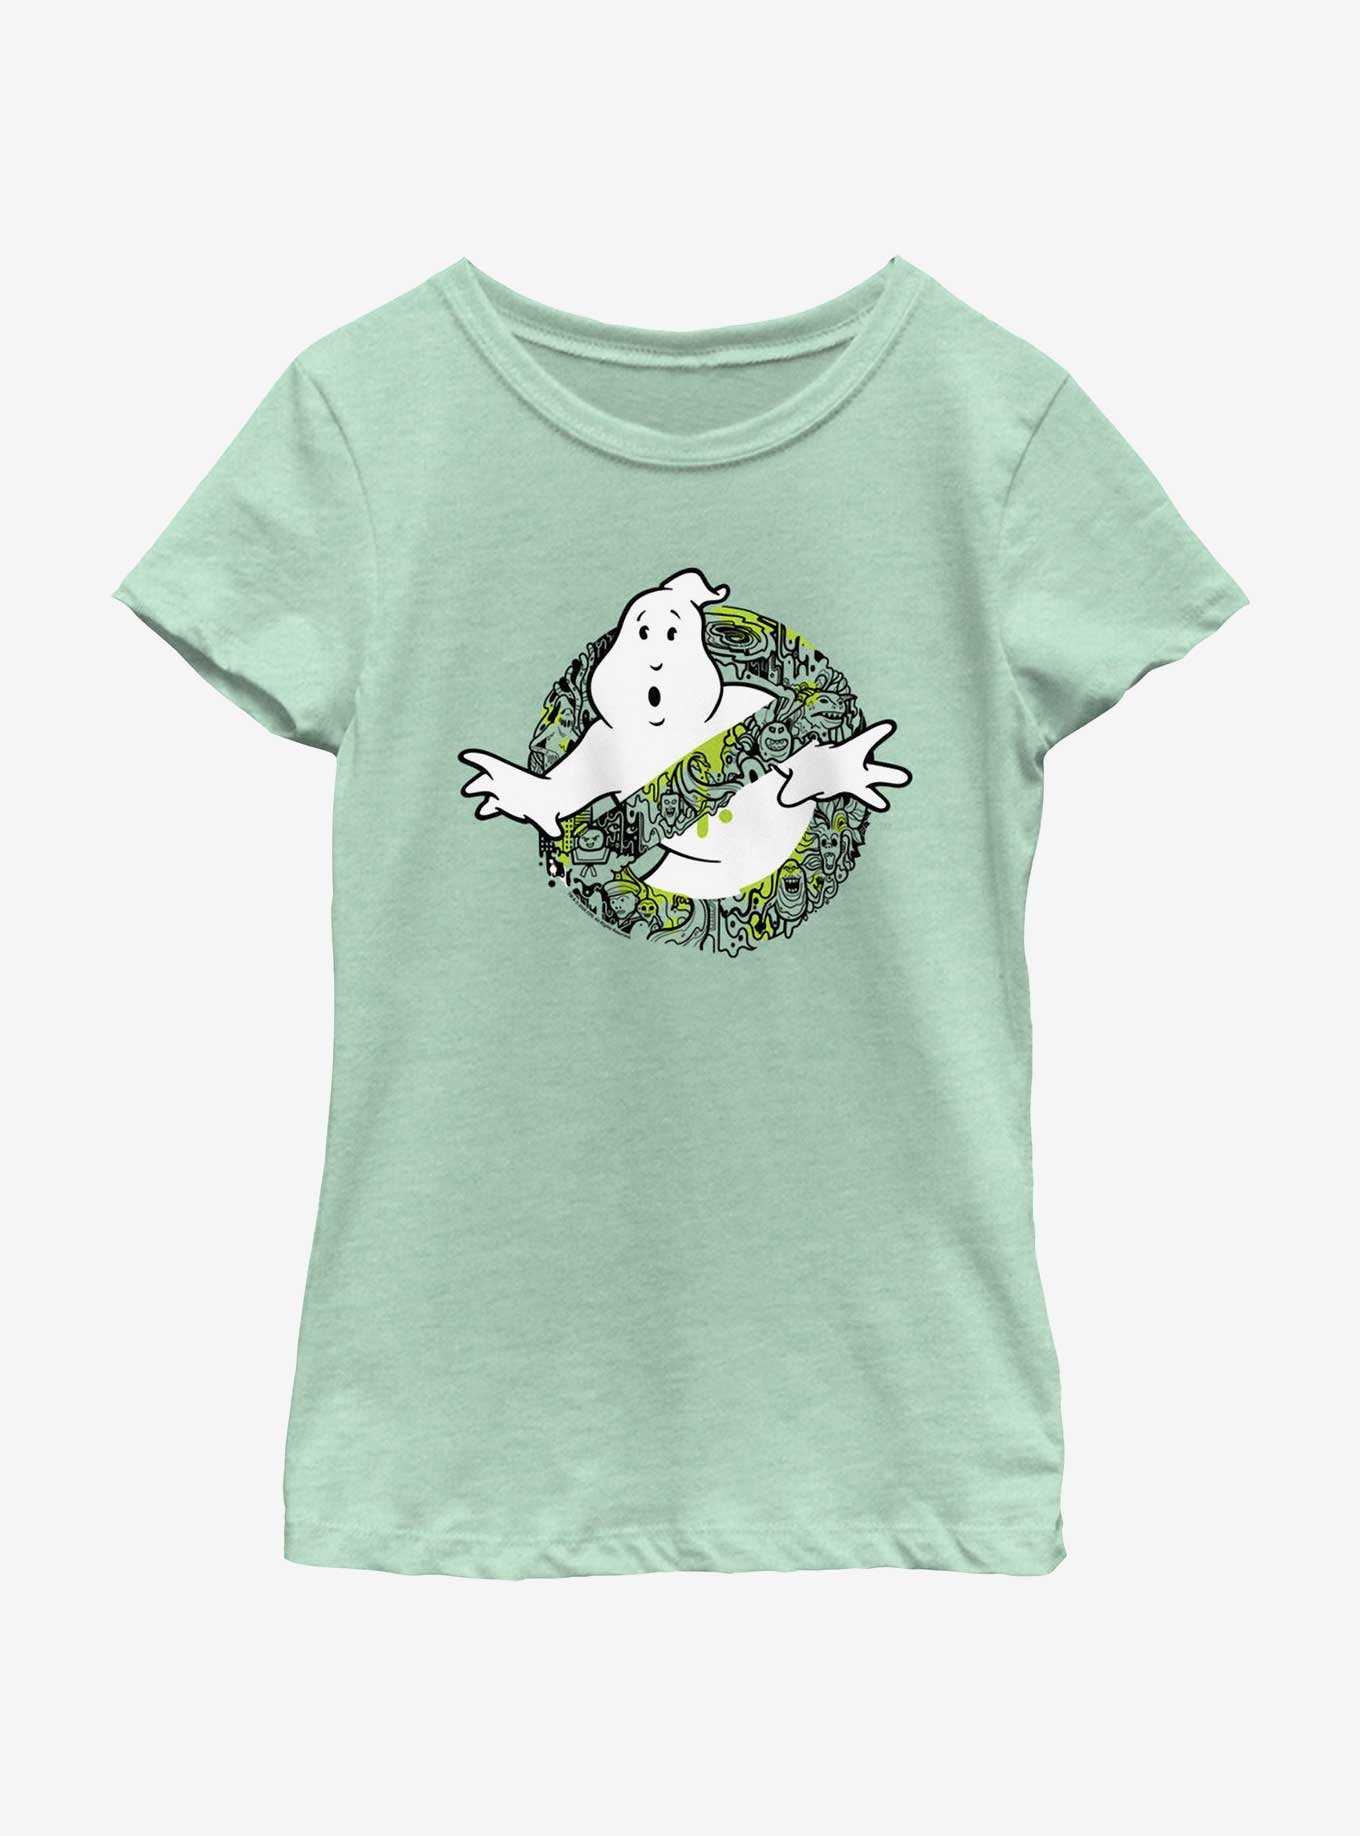 Ghostbusters: Frozen Empire Busting Ghosts Girls Youth T-Shirt, , hi-res